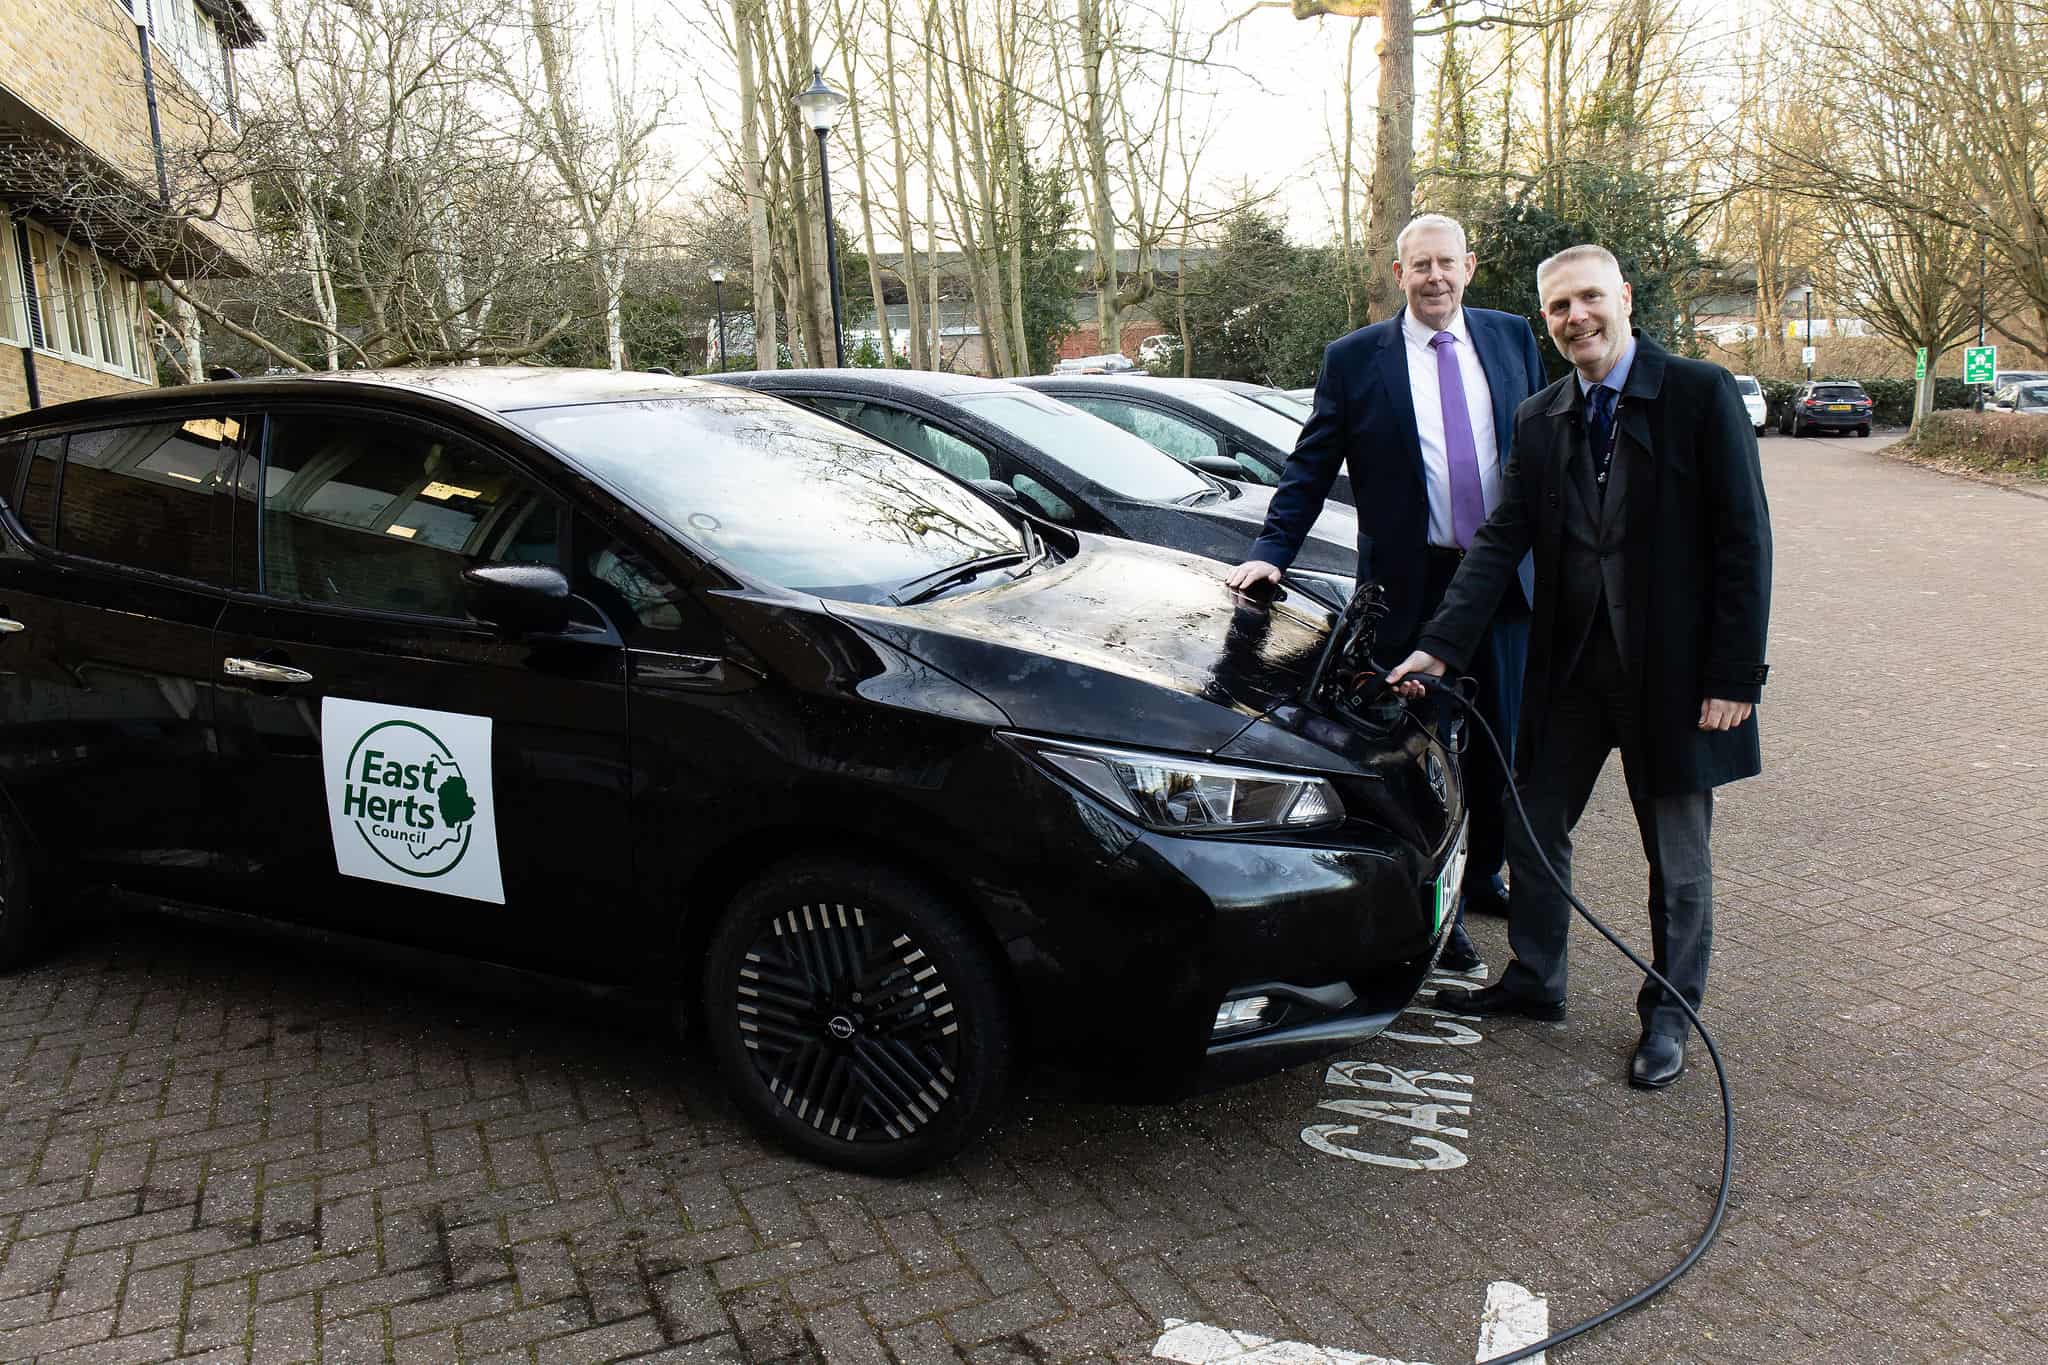 Switch to e-vehicles cuts East Herts Council’s carbon footprint